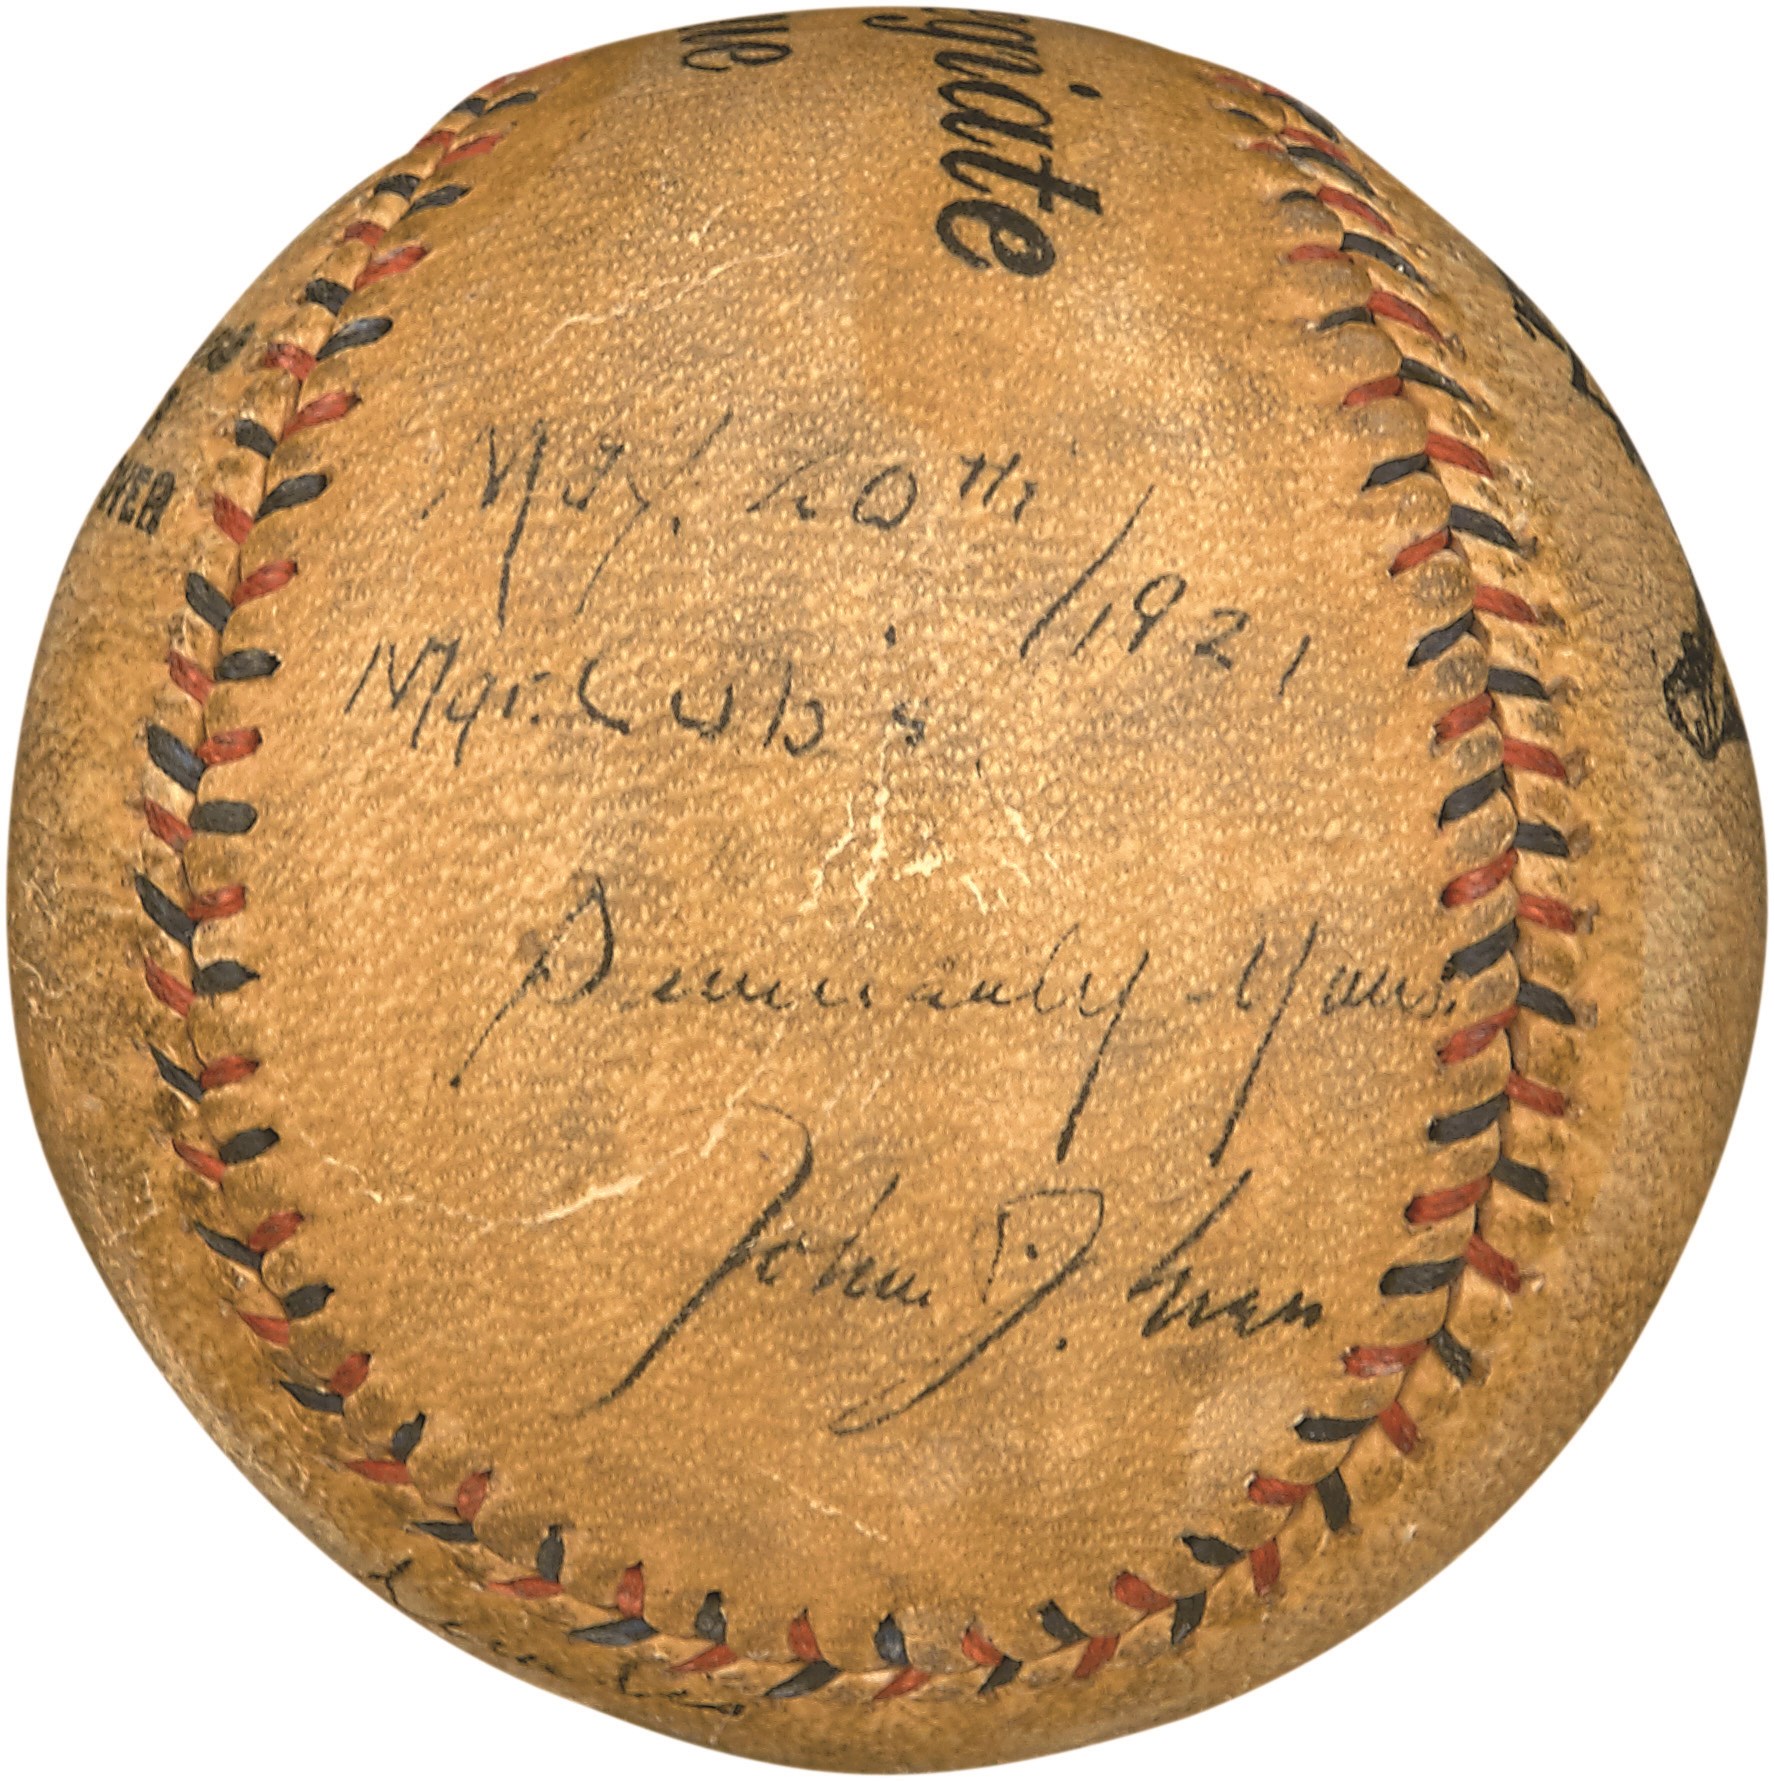 1921 Johnny Evers Signed Baseball - Displays as a Single! (Evers Family Letter, PSA)